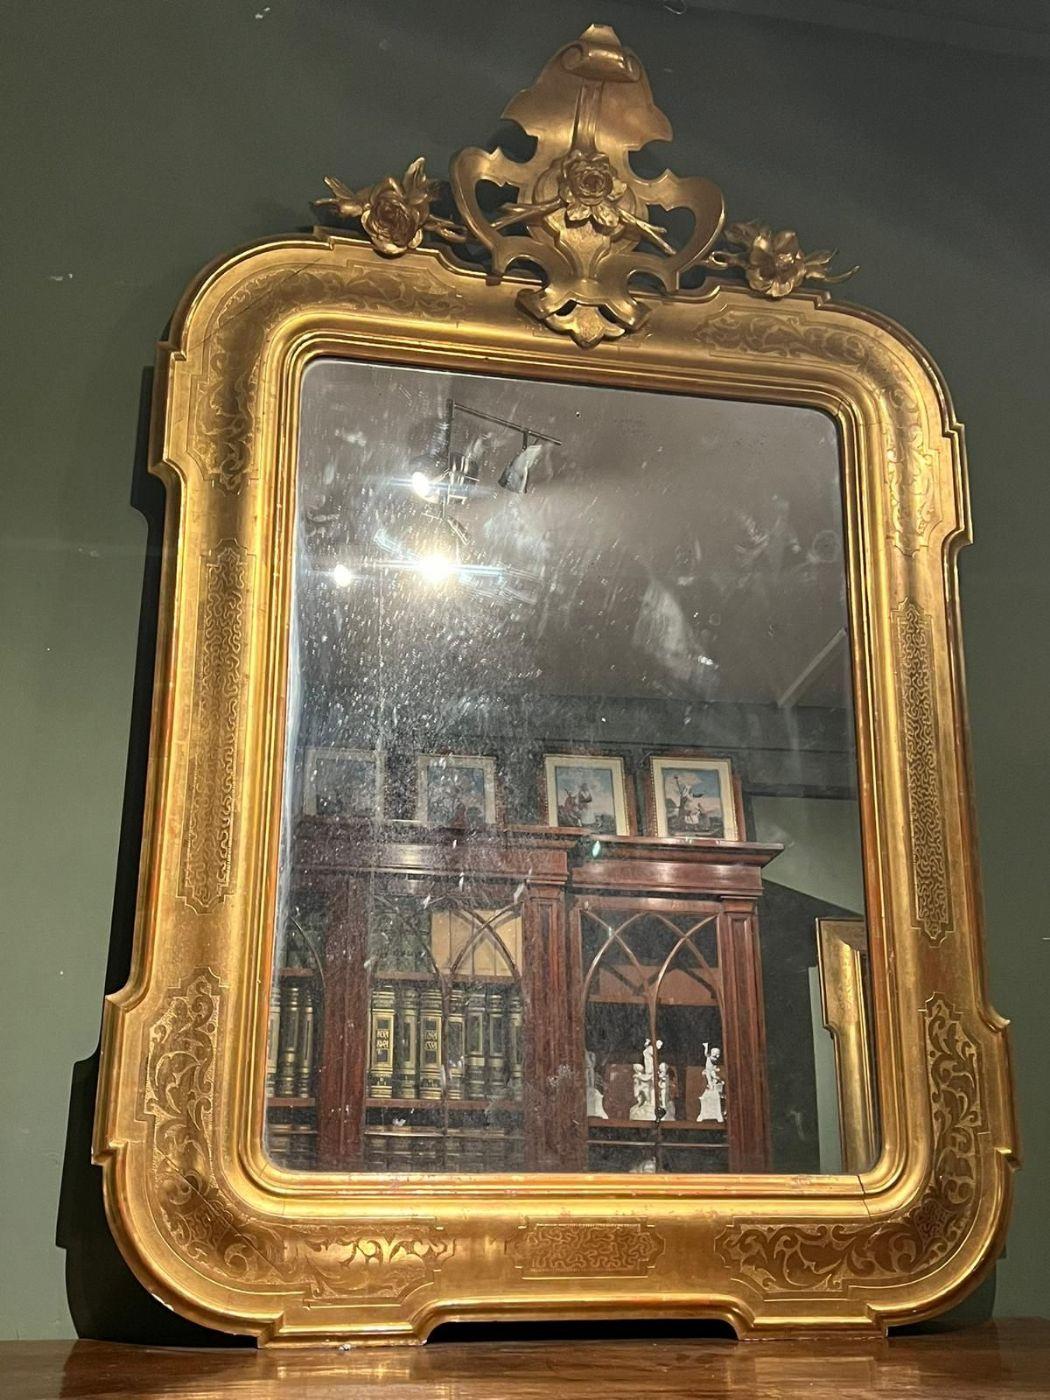 The mirror proposed here dates back to the mid-nineteenth century.
The 19th century antique mirror has a gilded frame in pure gold leaf
with an elegant coping, which makes it precious.
The mirror is original and intact in all its parts.